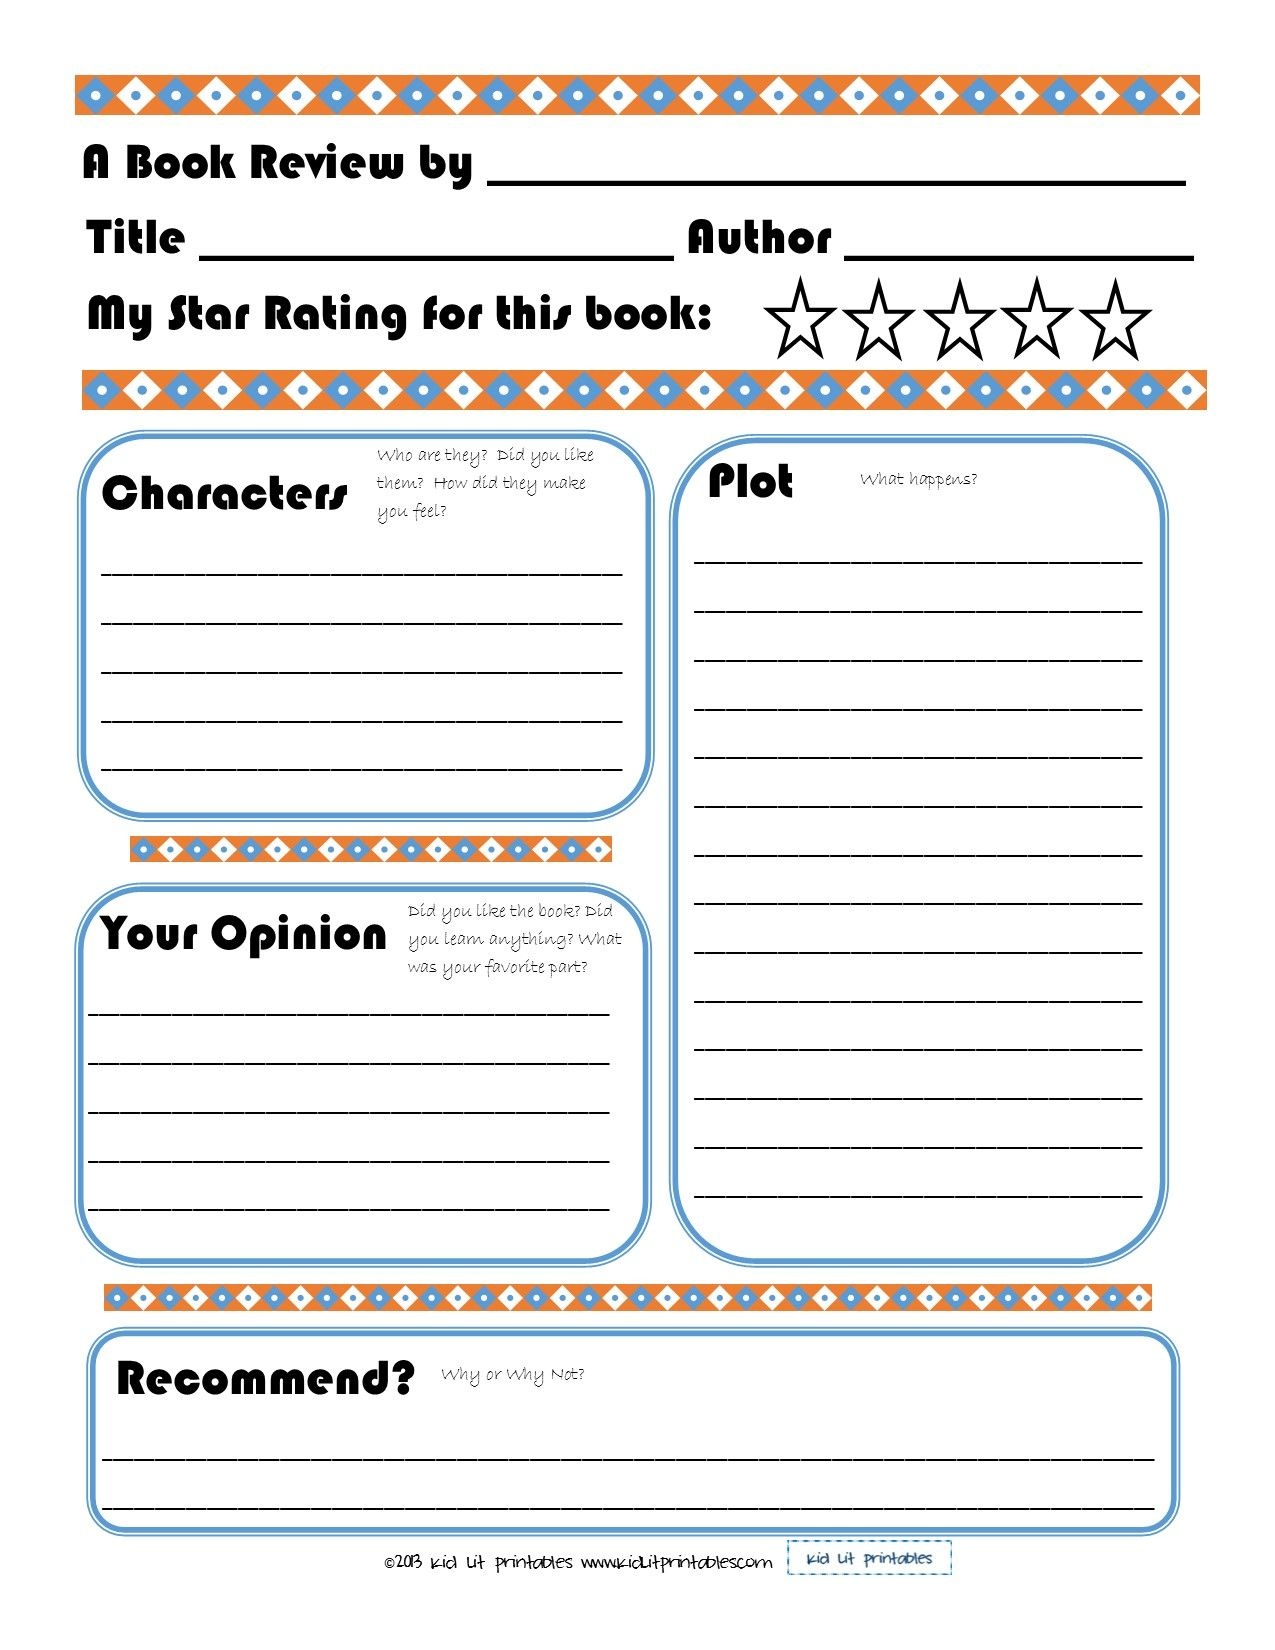 Free Printable Book Report Forms For Elementary Students Free Printable